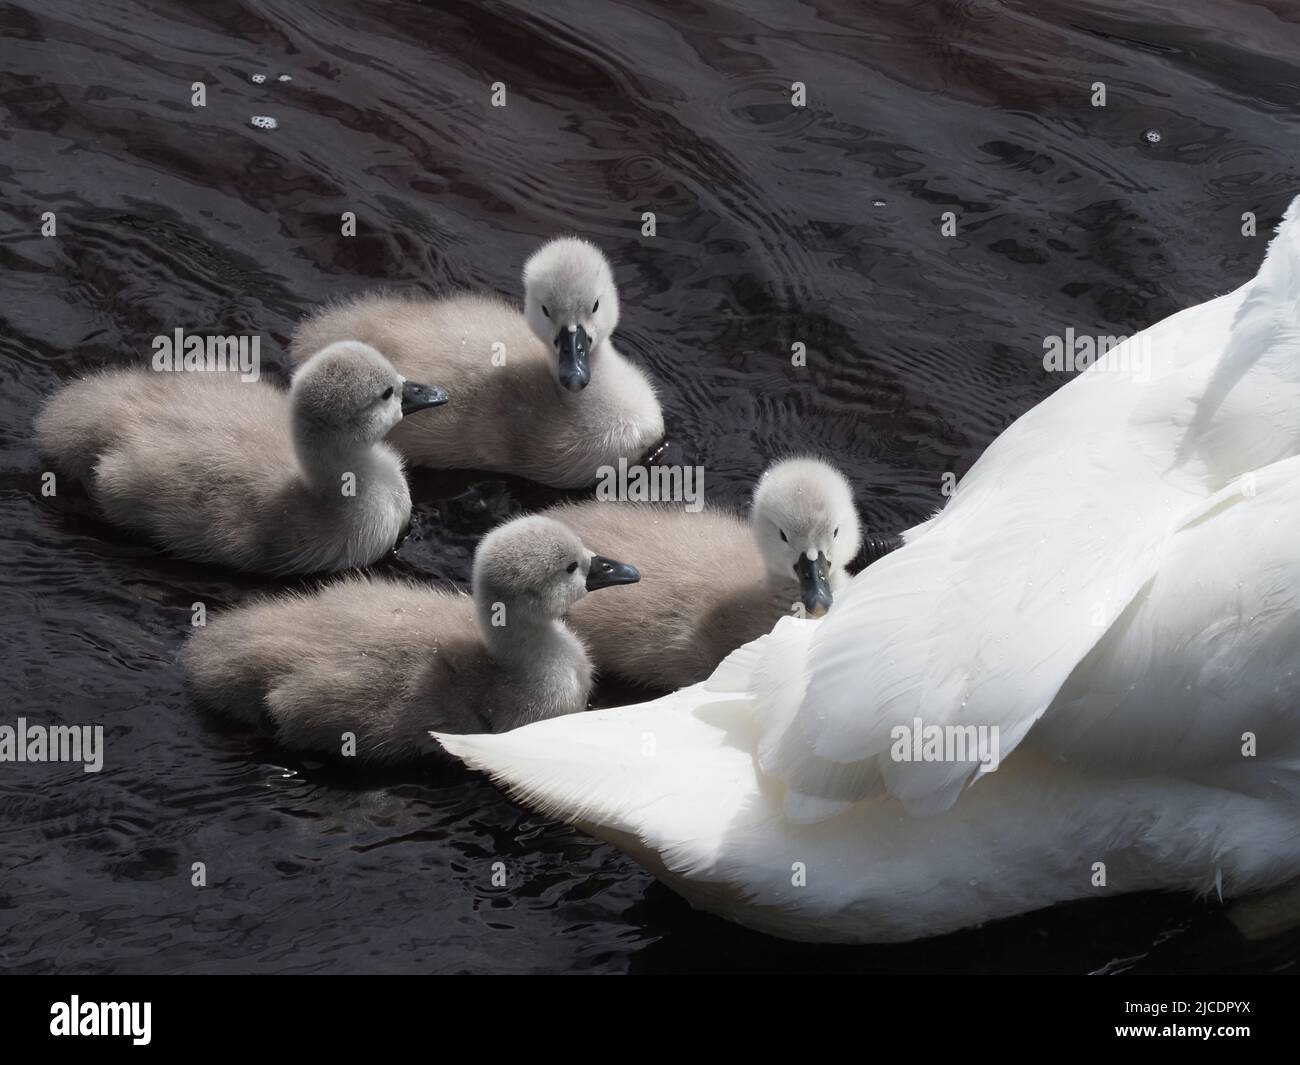 Four one week old cygnets, close to parent Swan. Their grey fluffy down, contrasting against the white feathers of the adult & the dark river water. Stock Photo